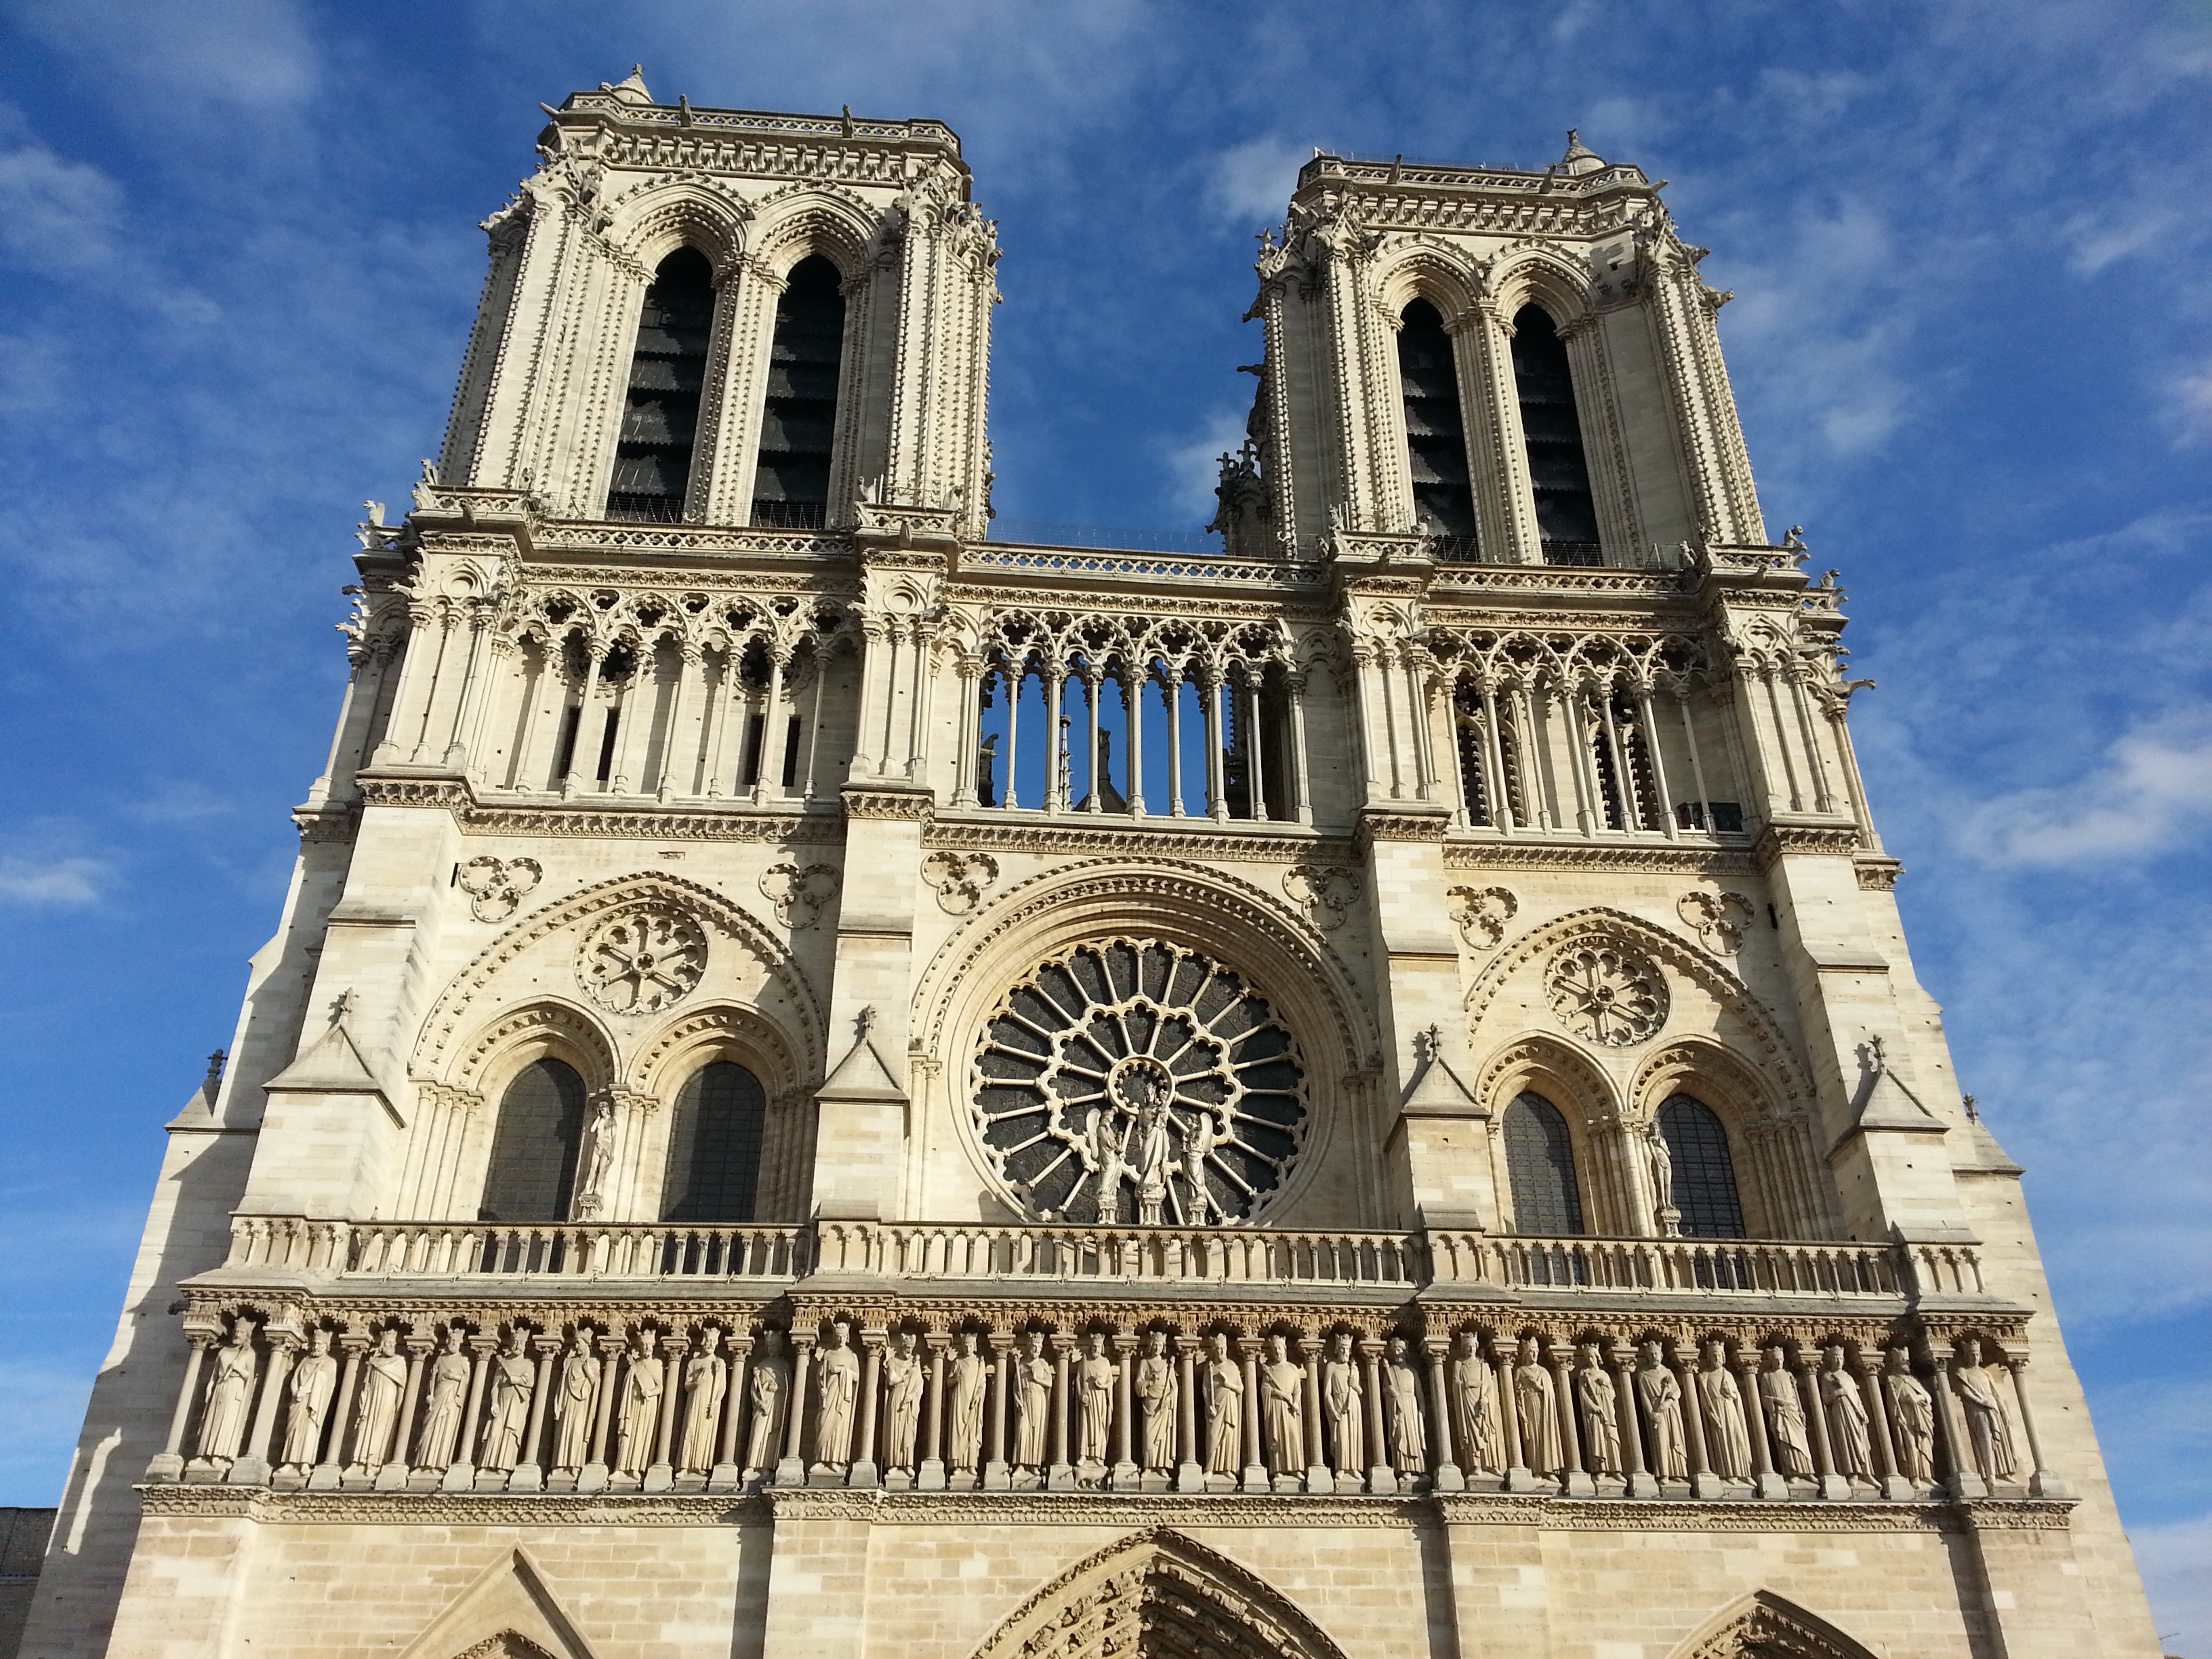 The bell towers of Notre Dame